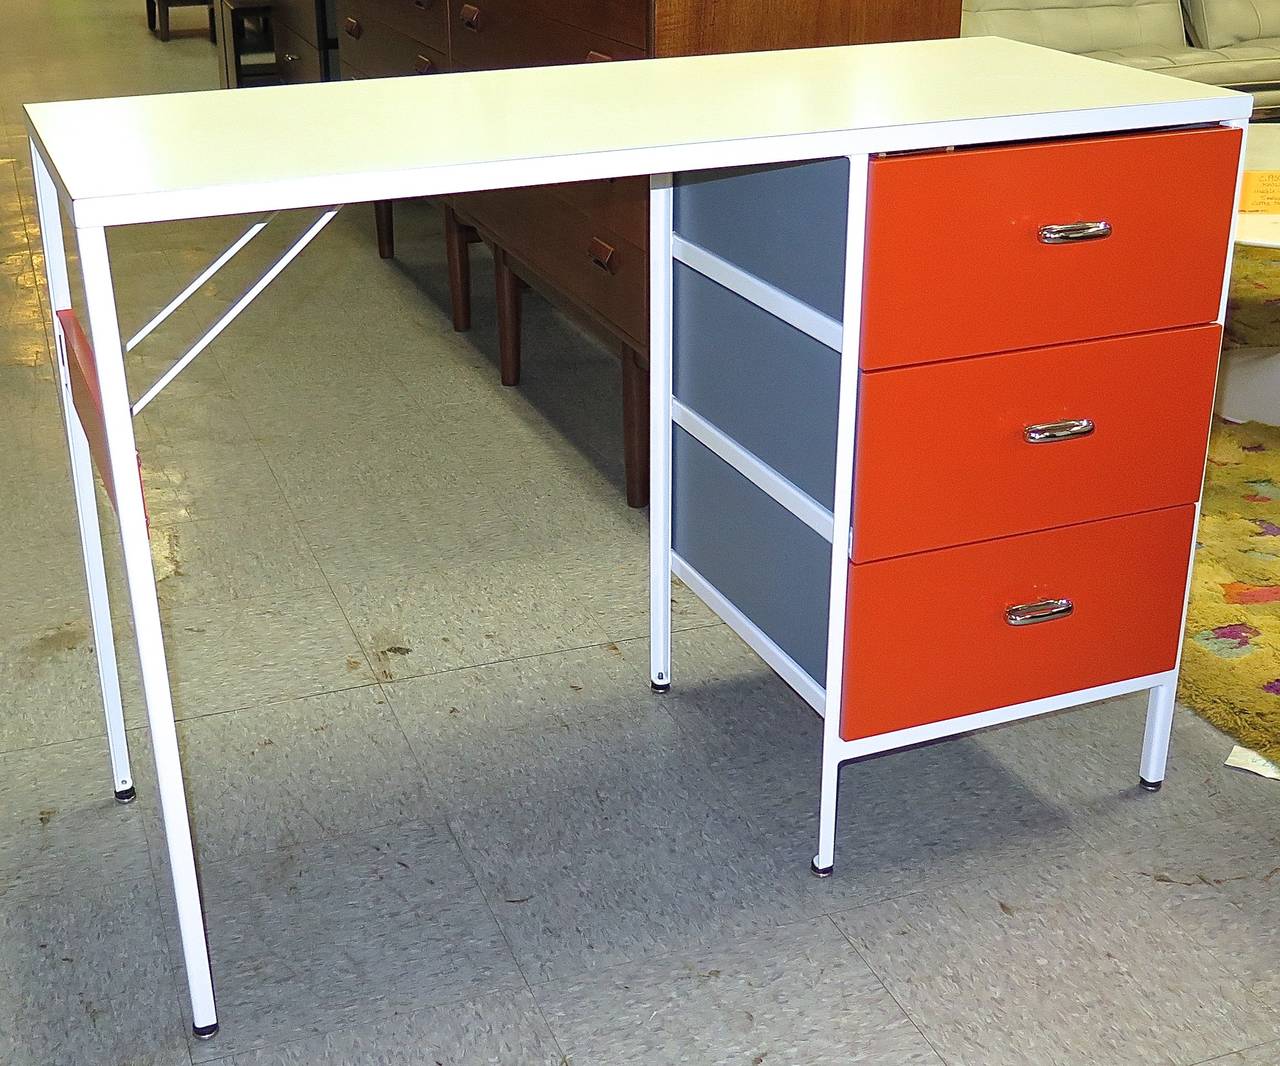 Original label. Repainted in bright tangerine orange color with blue-grey drawers. Excellent condition. Top laminate has some marks.